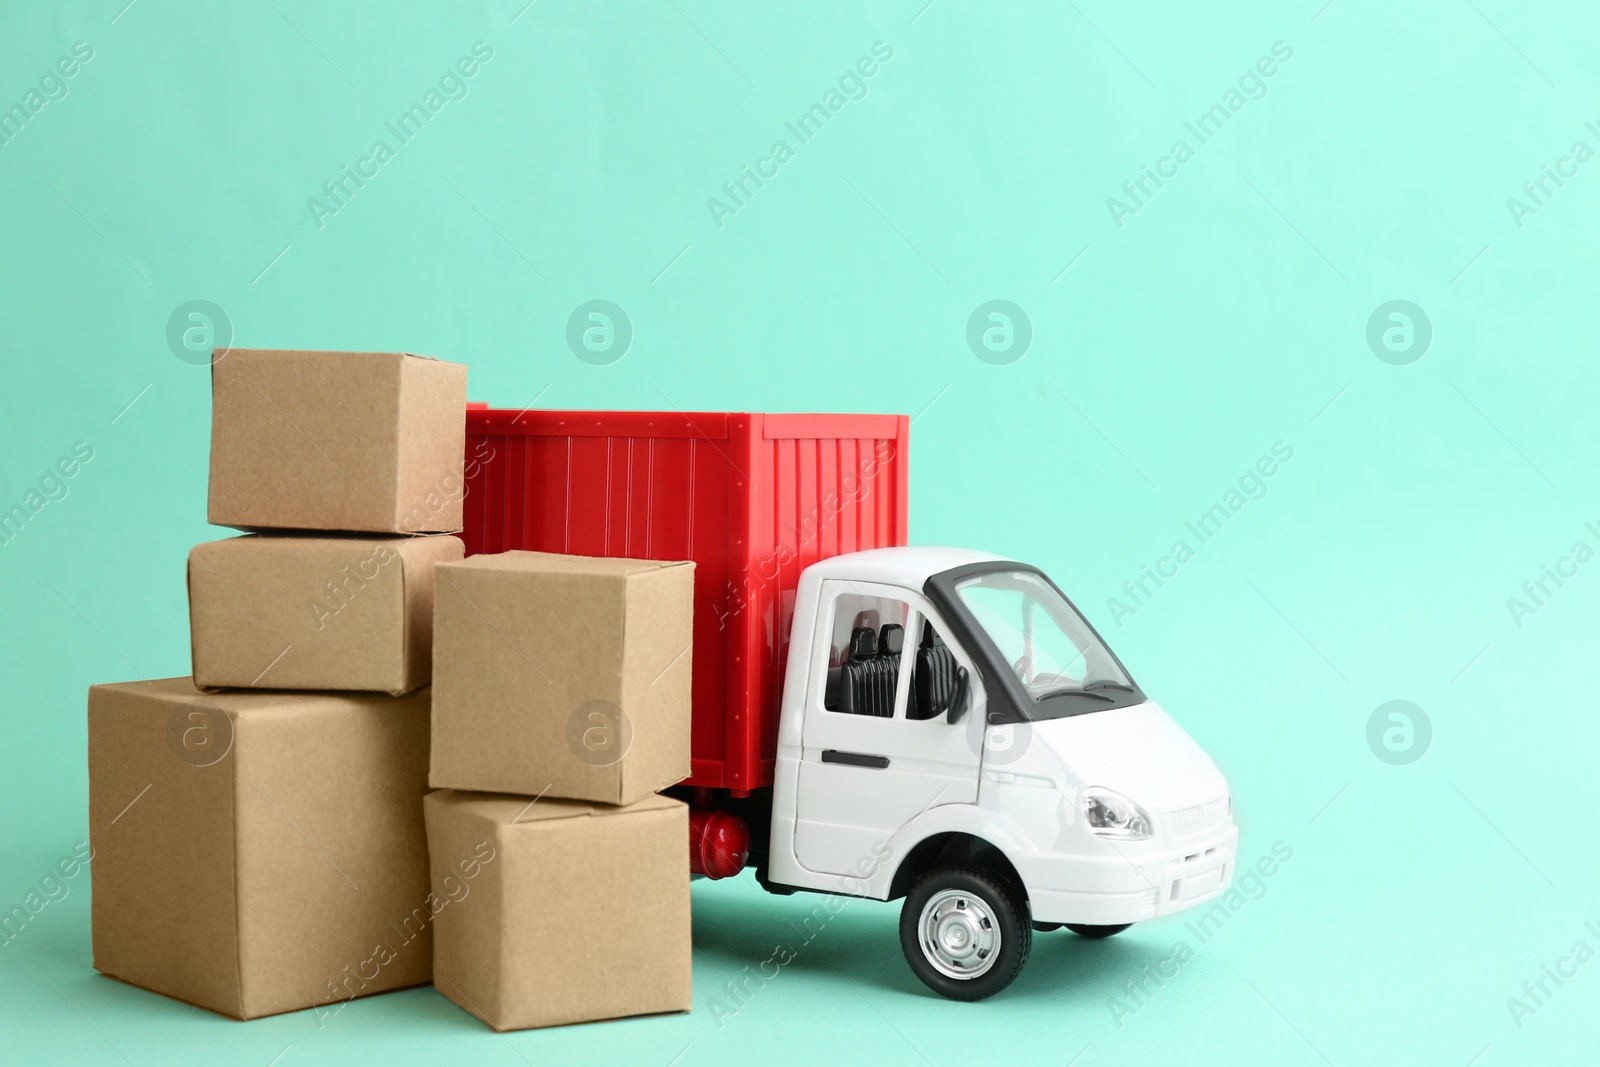 Photo of Truck model and carton boxes on turquoise background. Courier service